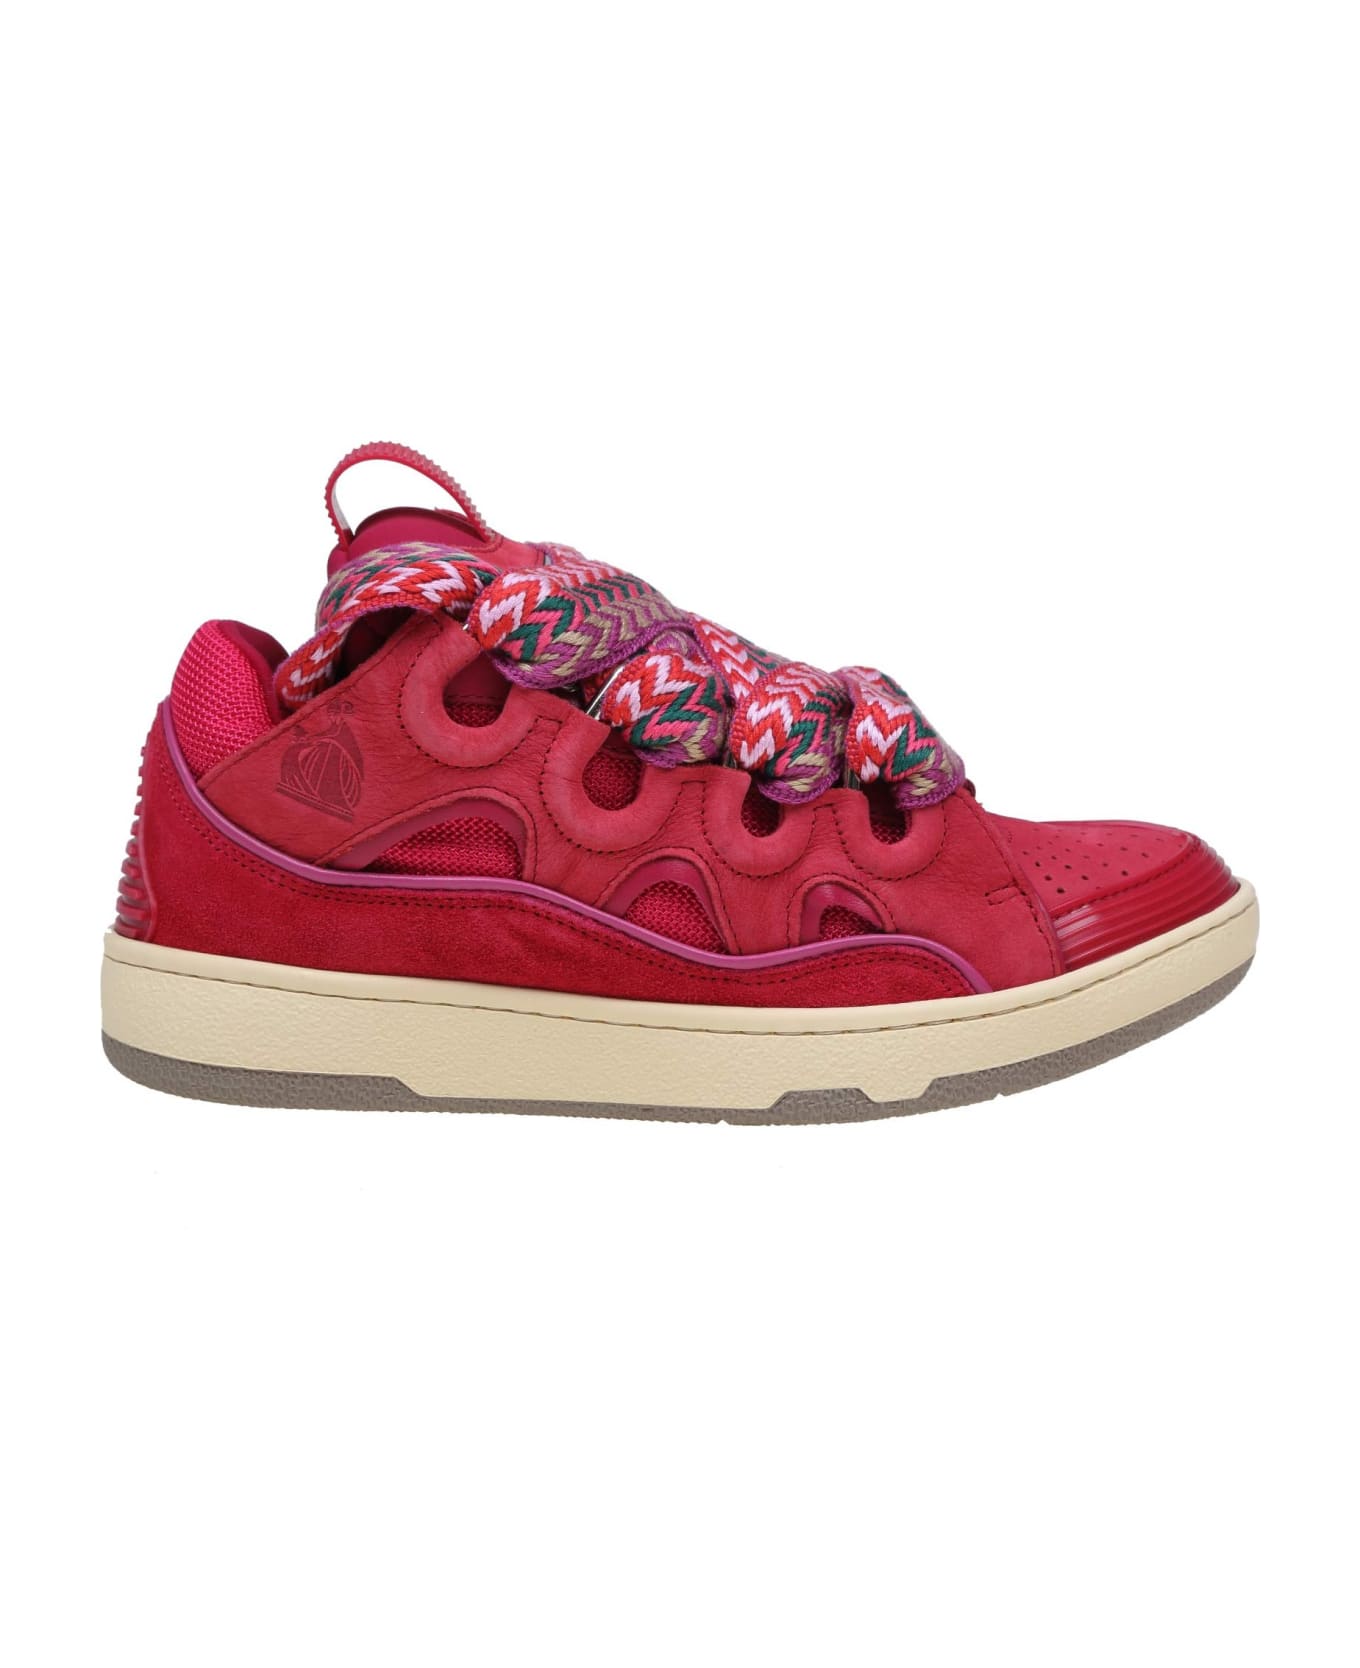 Lanvin Curb Sneakers In Suede And Watermelon Color Fabric - Watermelon